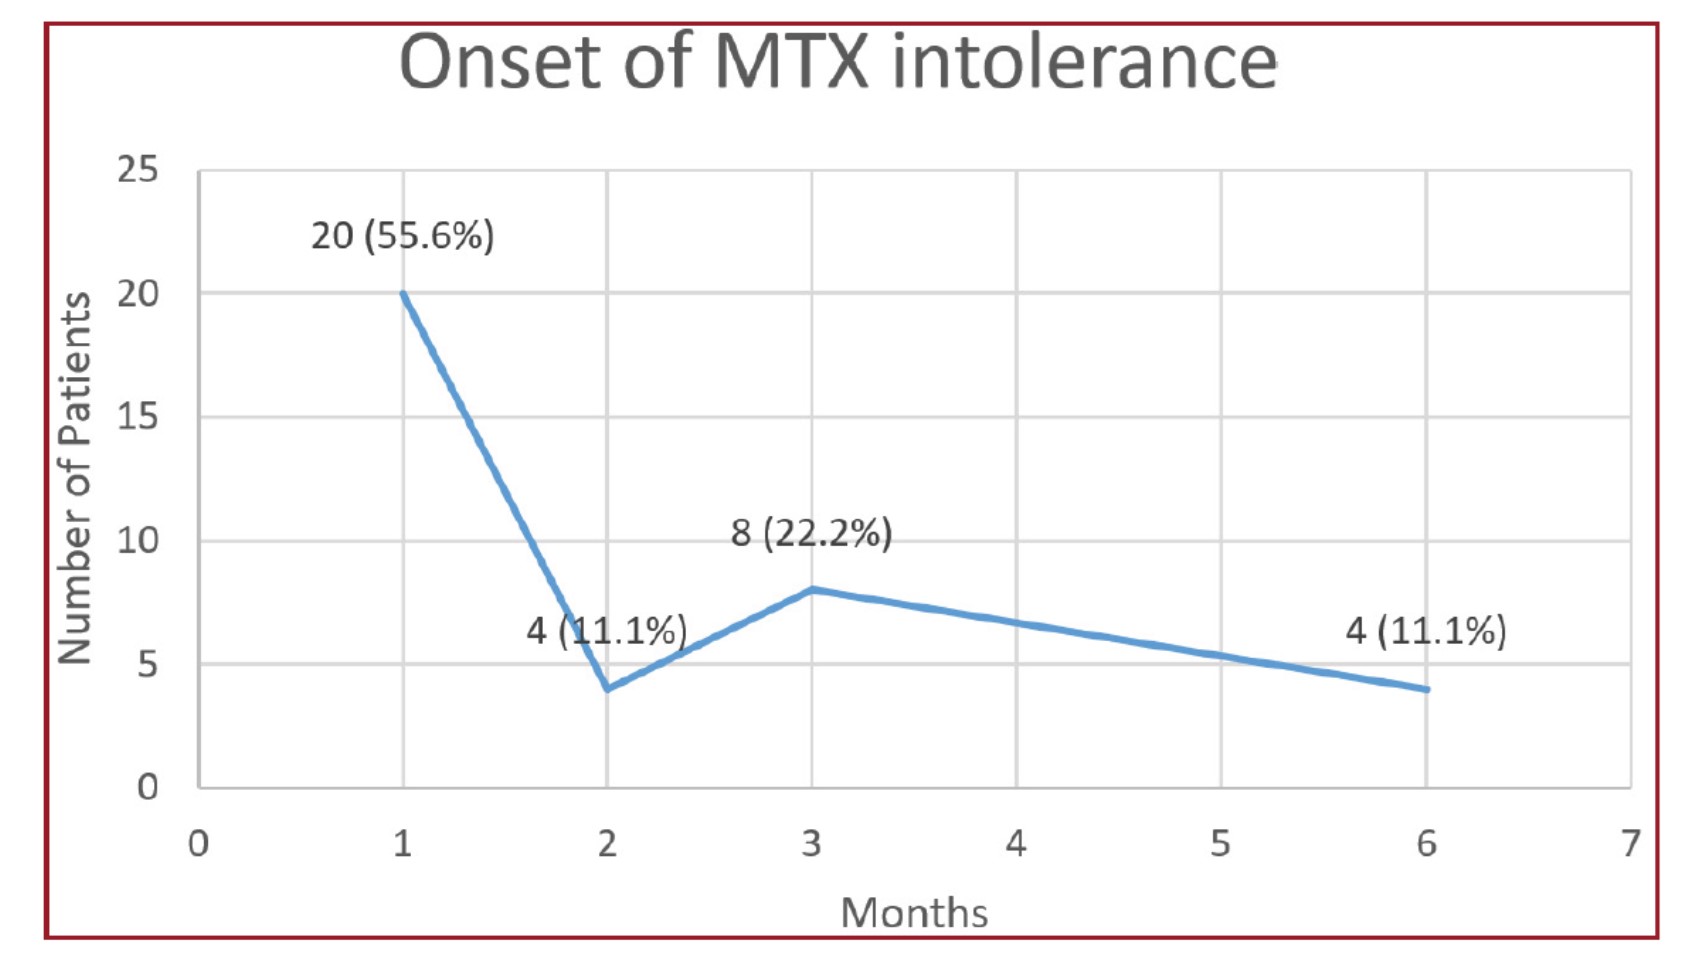 Distribution of MTX intolerance at disease onset